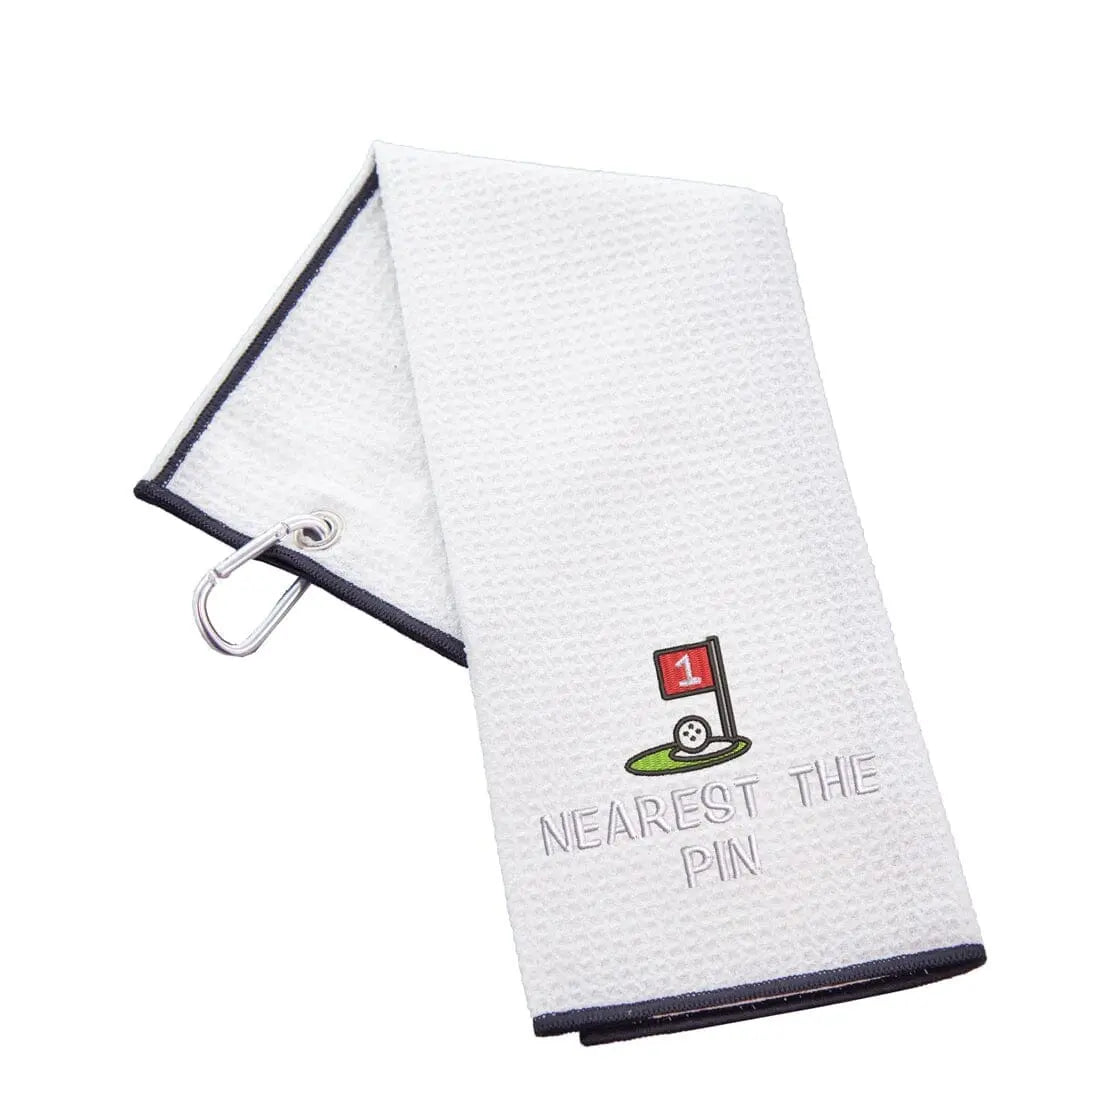 Tri-Fold Golf Towel Embroidered For Nearest The Pin Competition